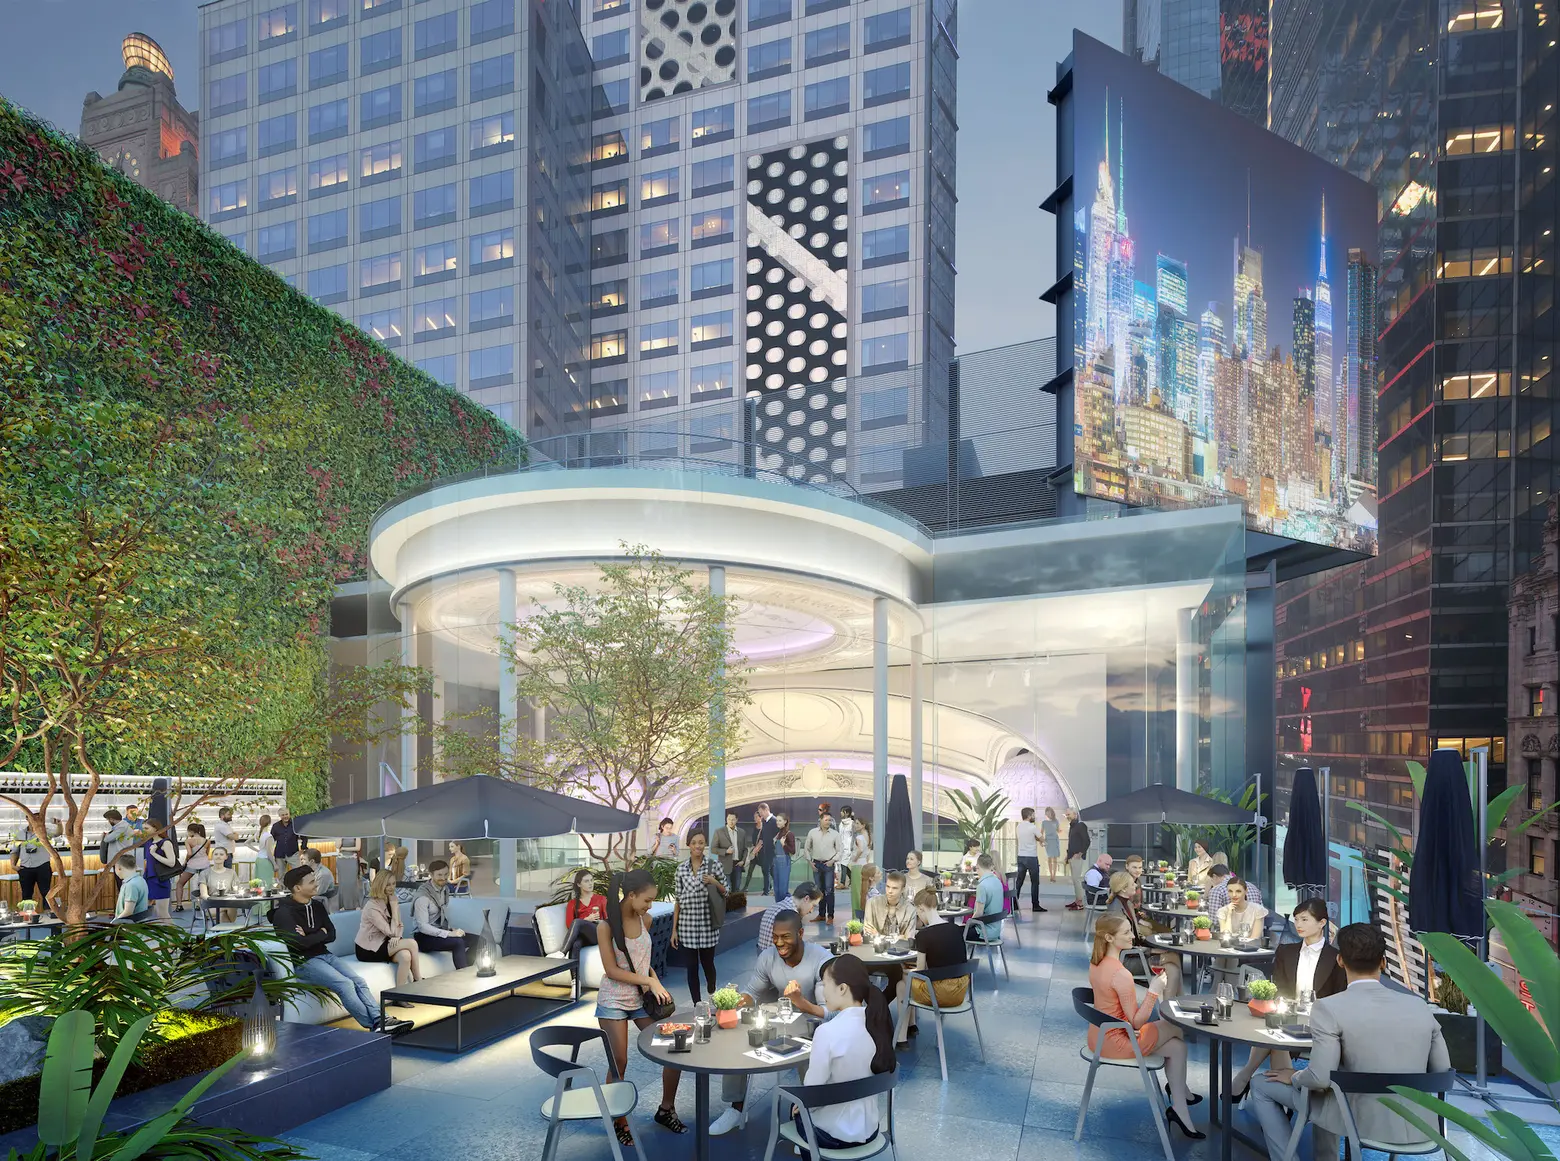 See more renderings of historic Times Square Theater’s $100M overhaul